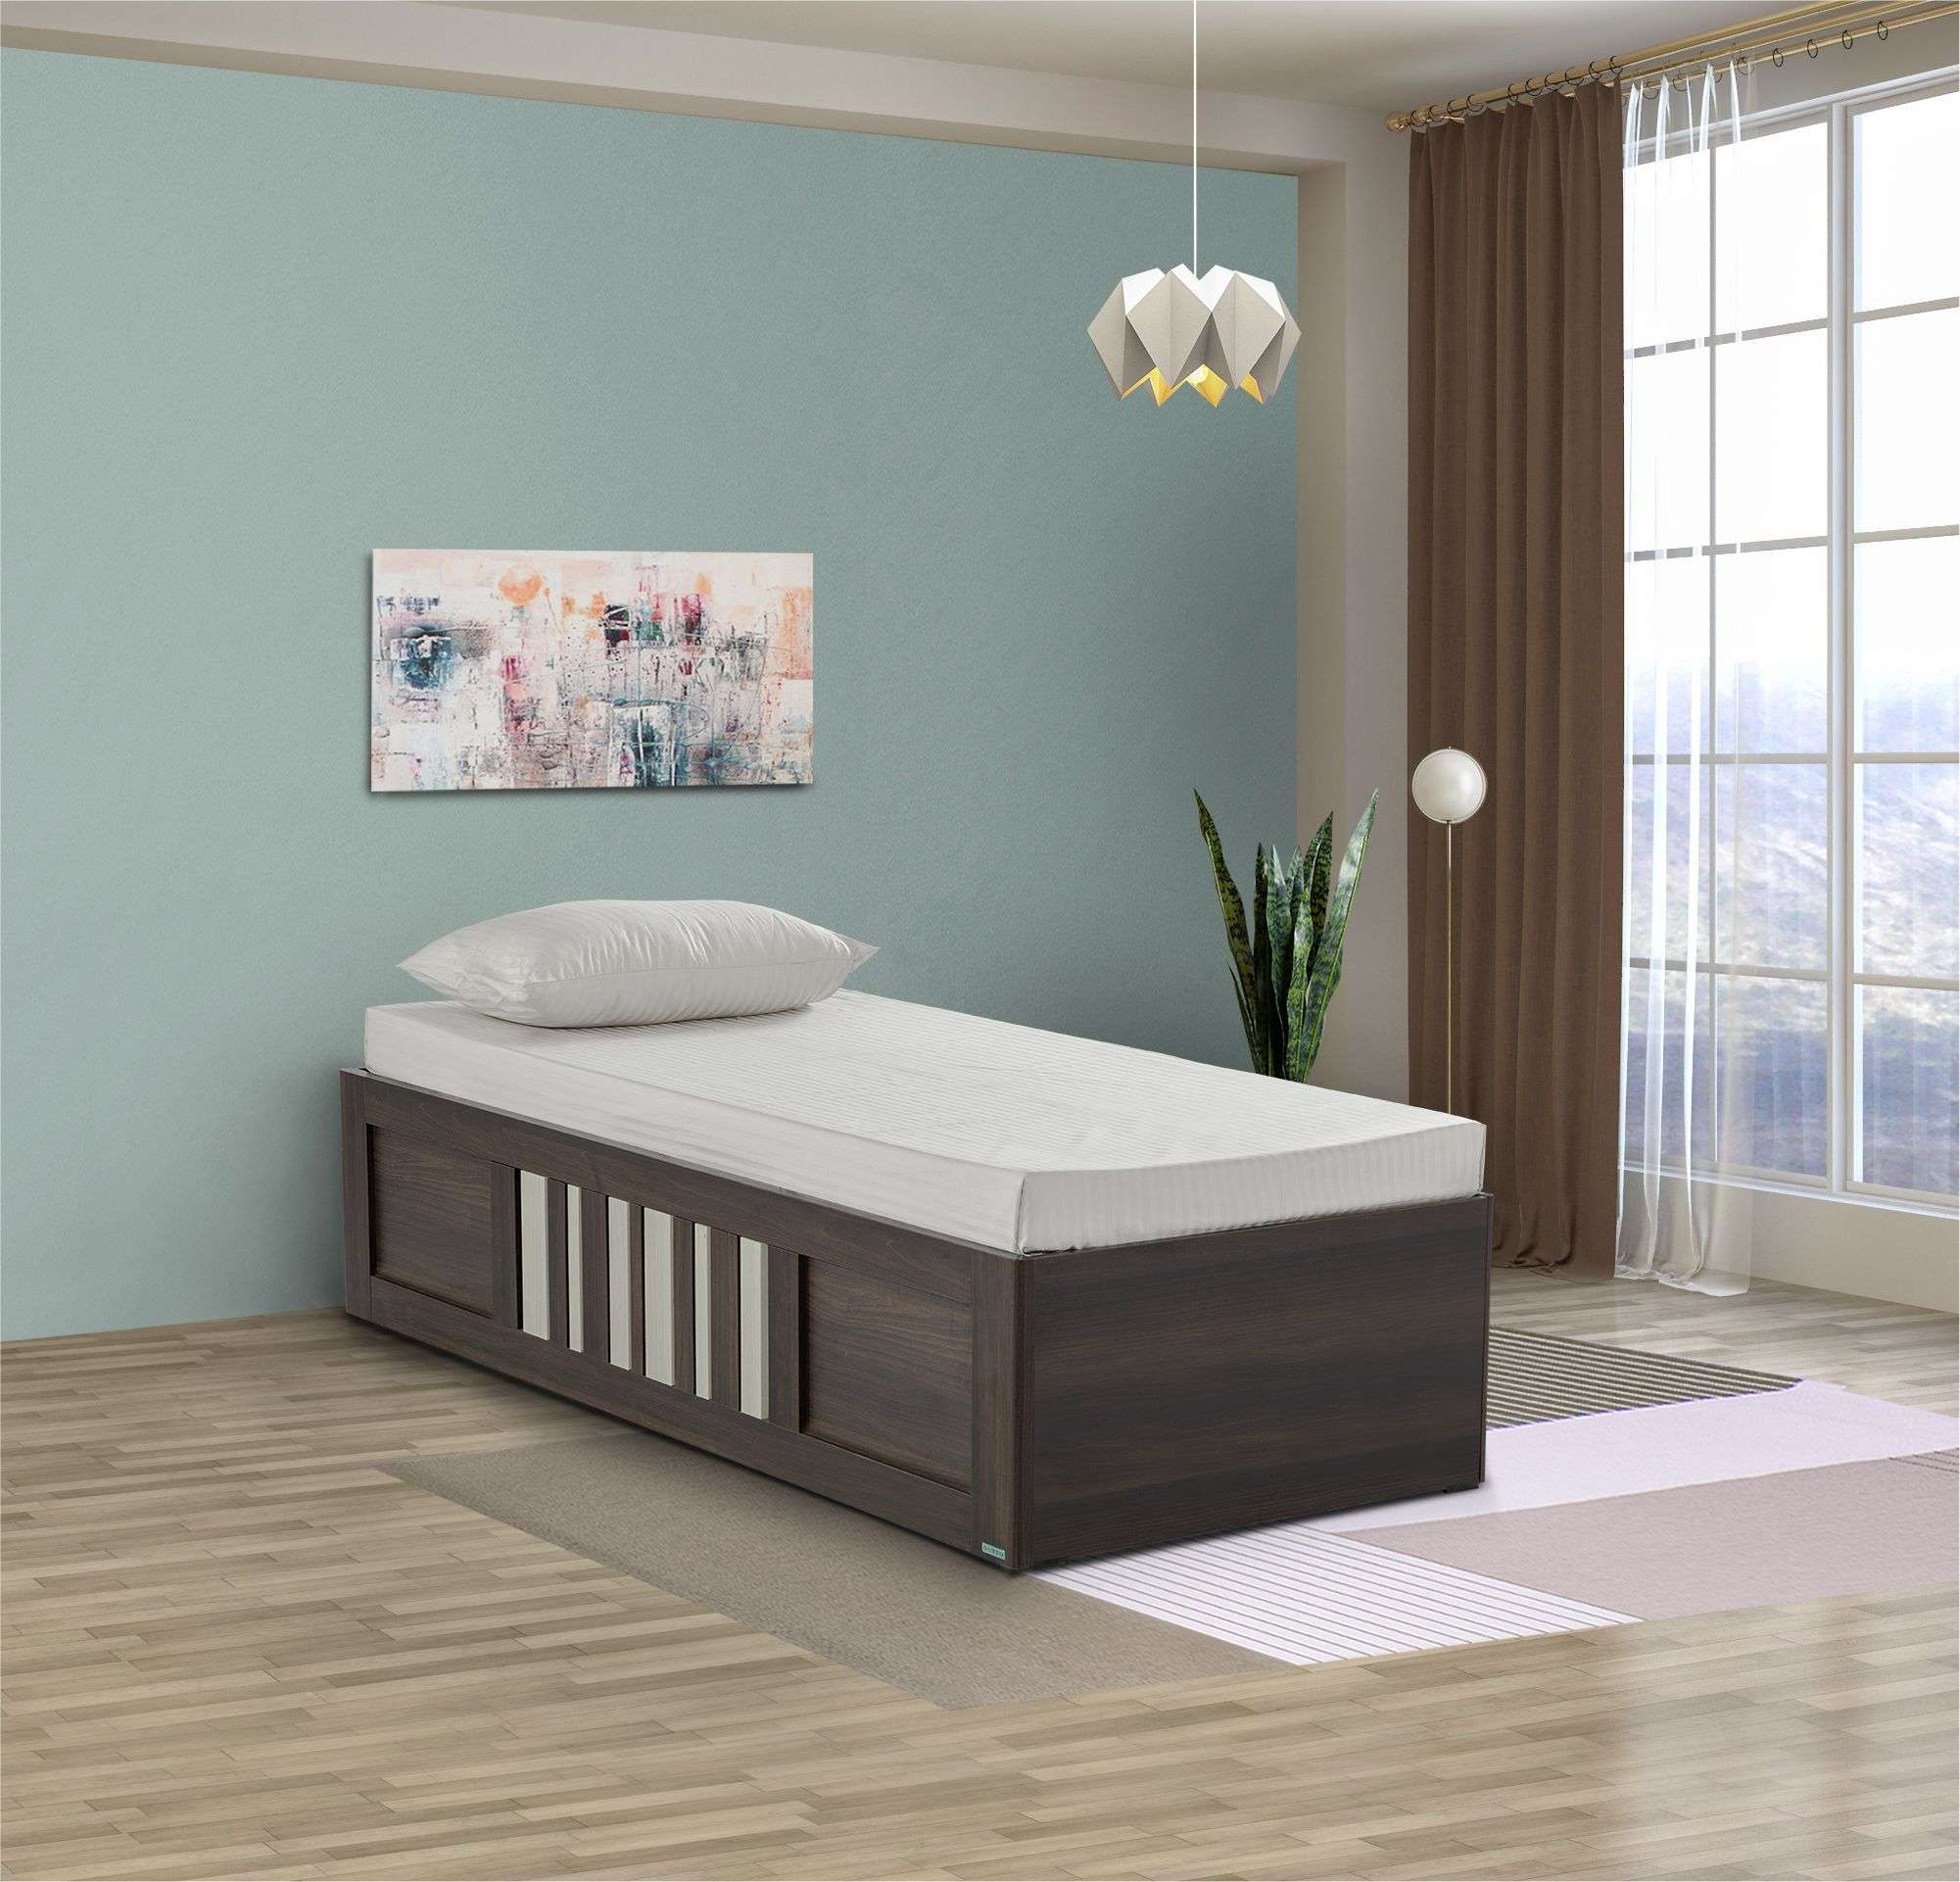 KDB001-KD Day Bed With Storage-M42/M41